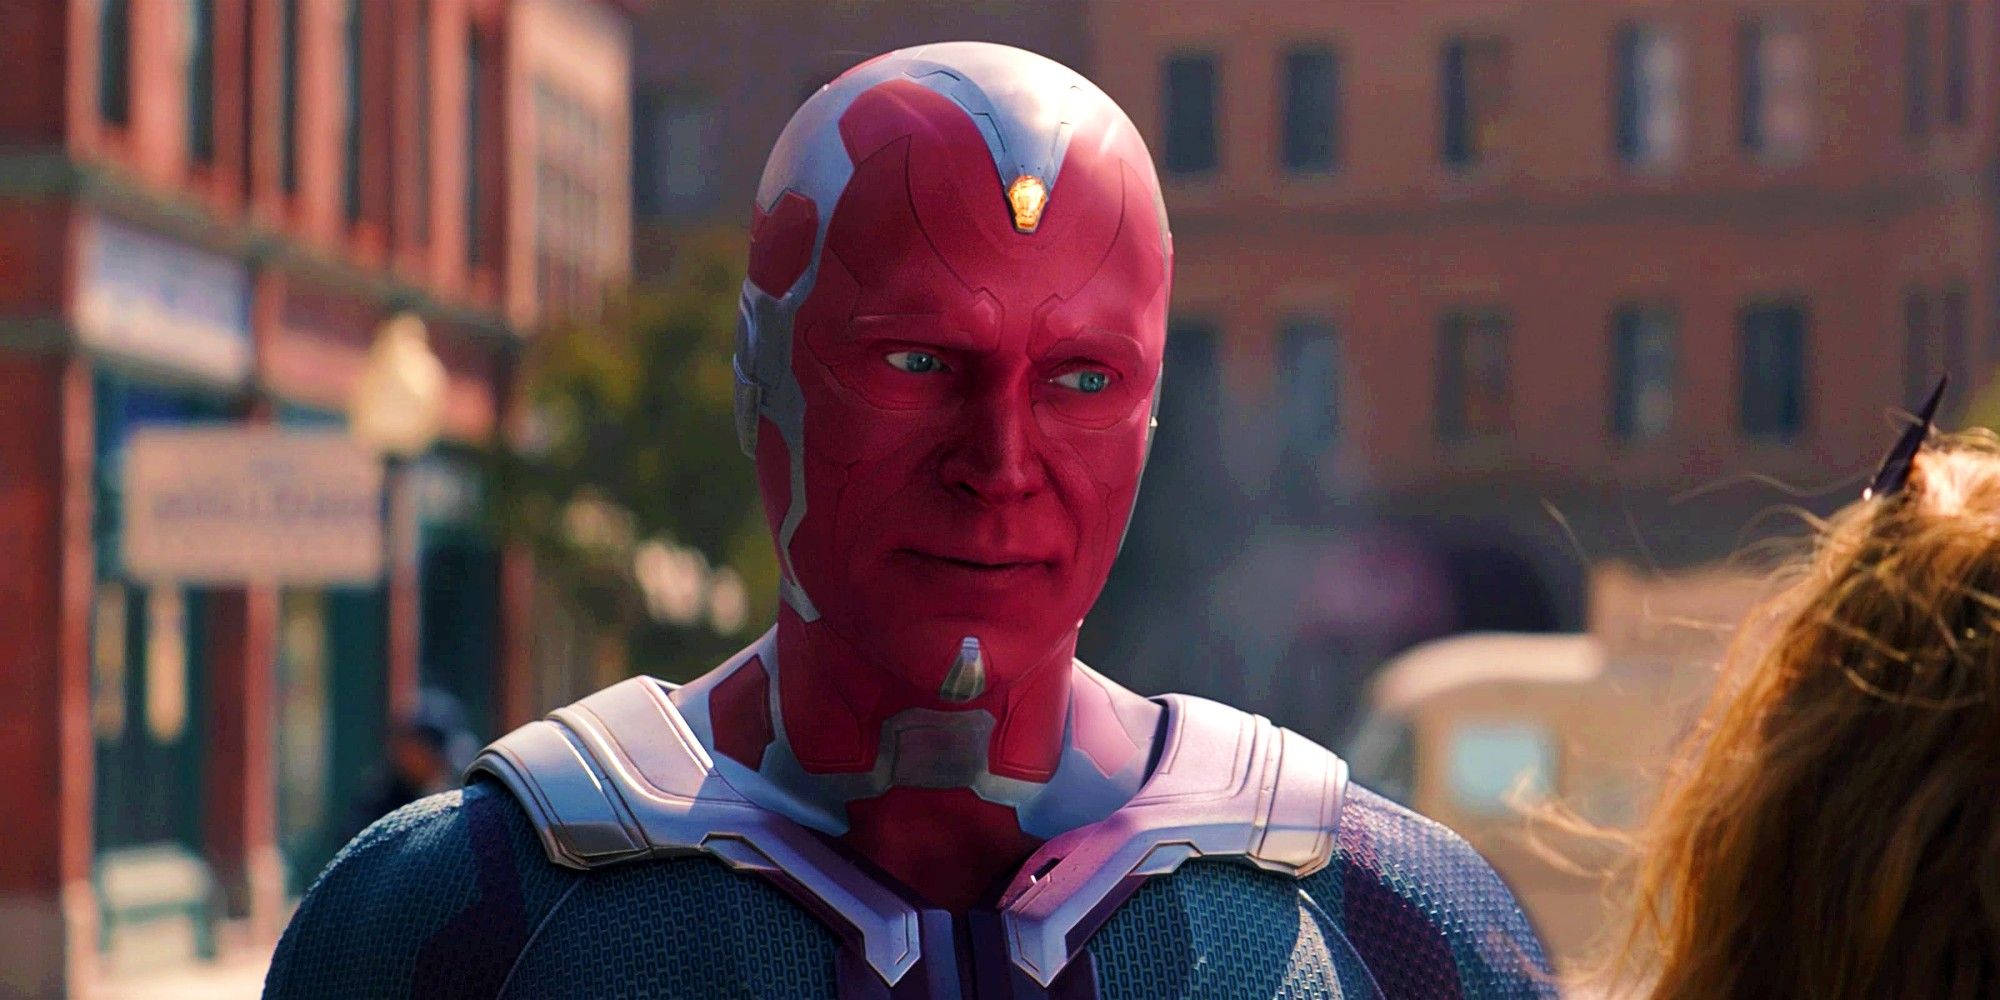 Paul Bettany as Vision In The Town Square Talking To Wanda In WandaVision